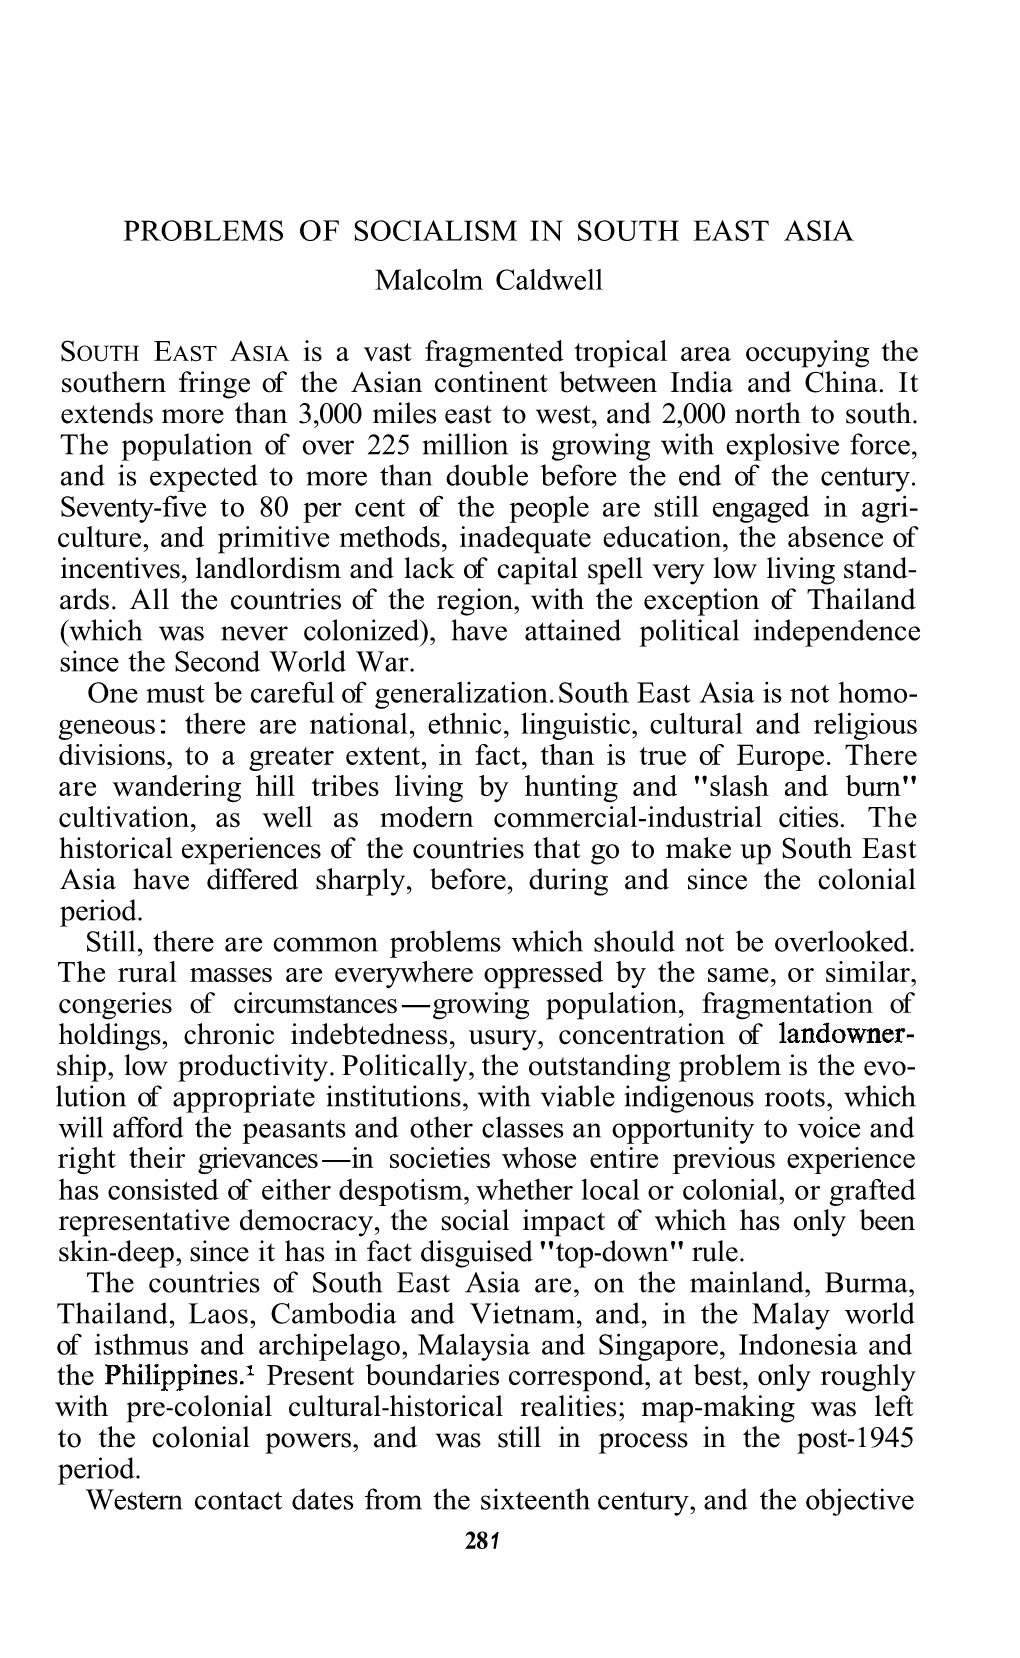 PROBLEMS of SOCIALISM in SOUTH EAST ASIA Malcolm Caldwell